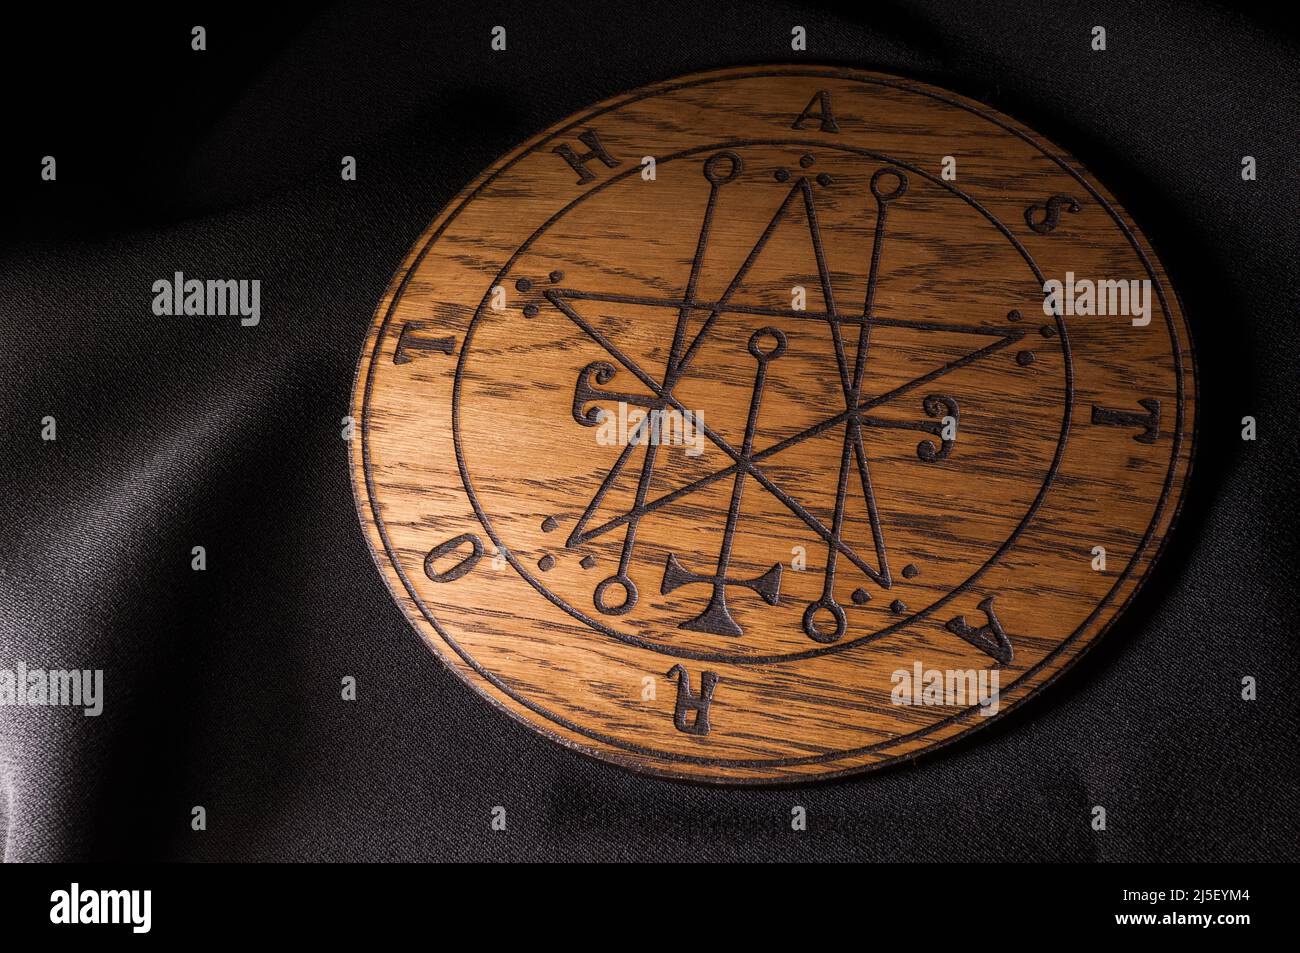 A Ouija Board, yellow on a black background Stock Photo